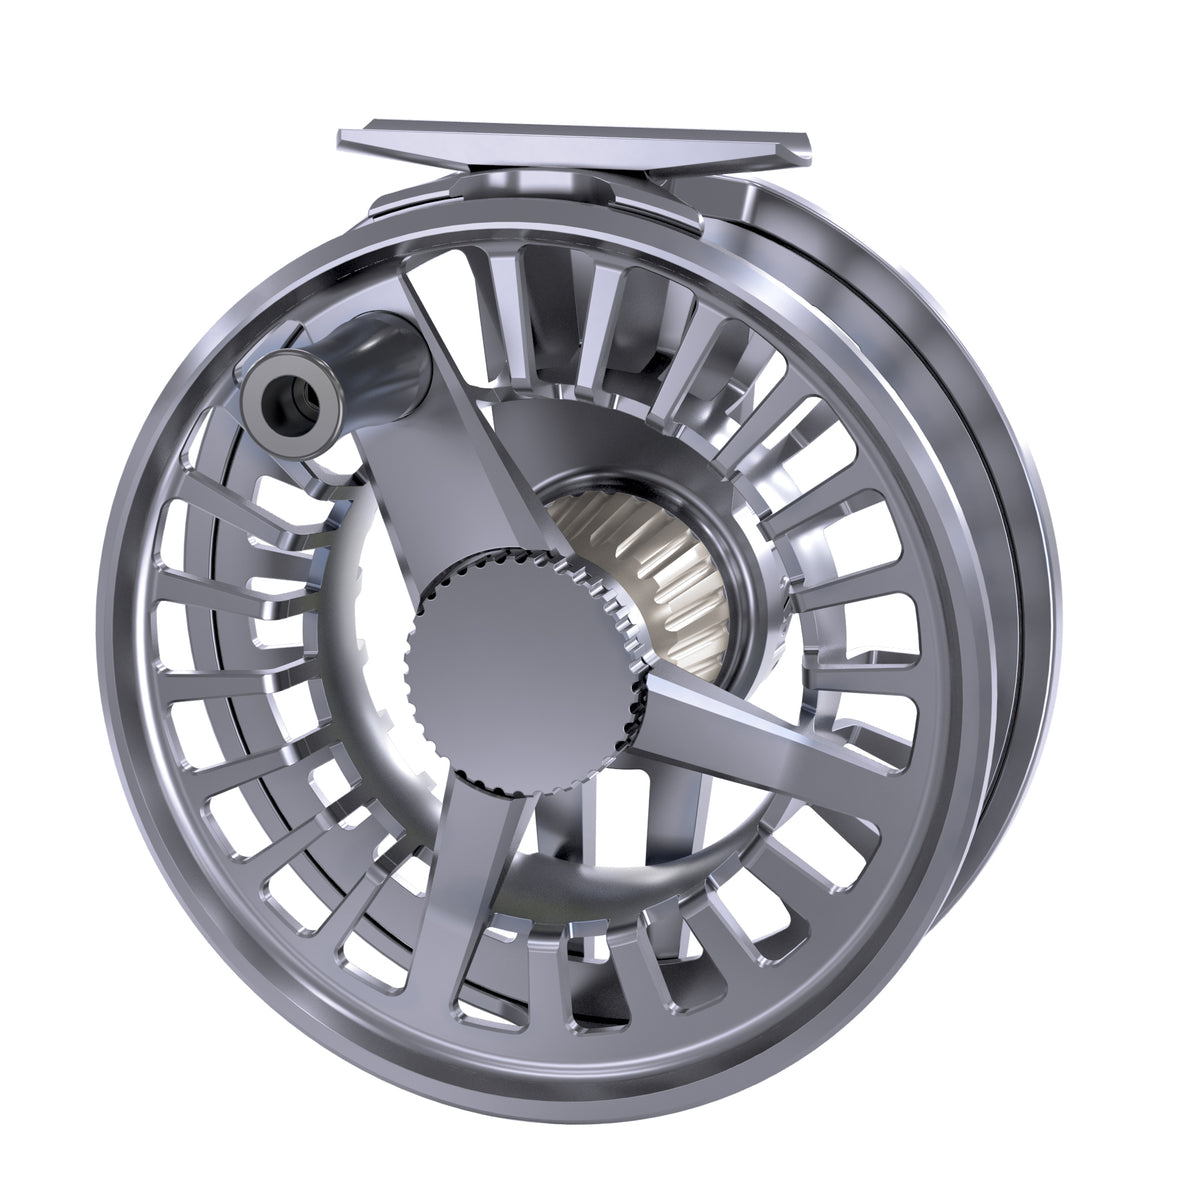 Lamson Cobalt Fly Reel – Fish Tales Fly Shop